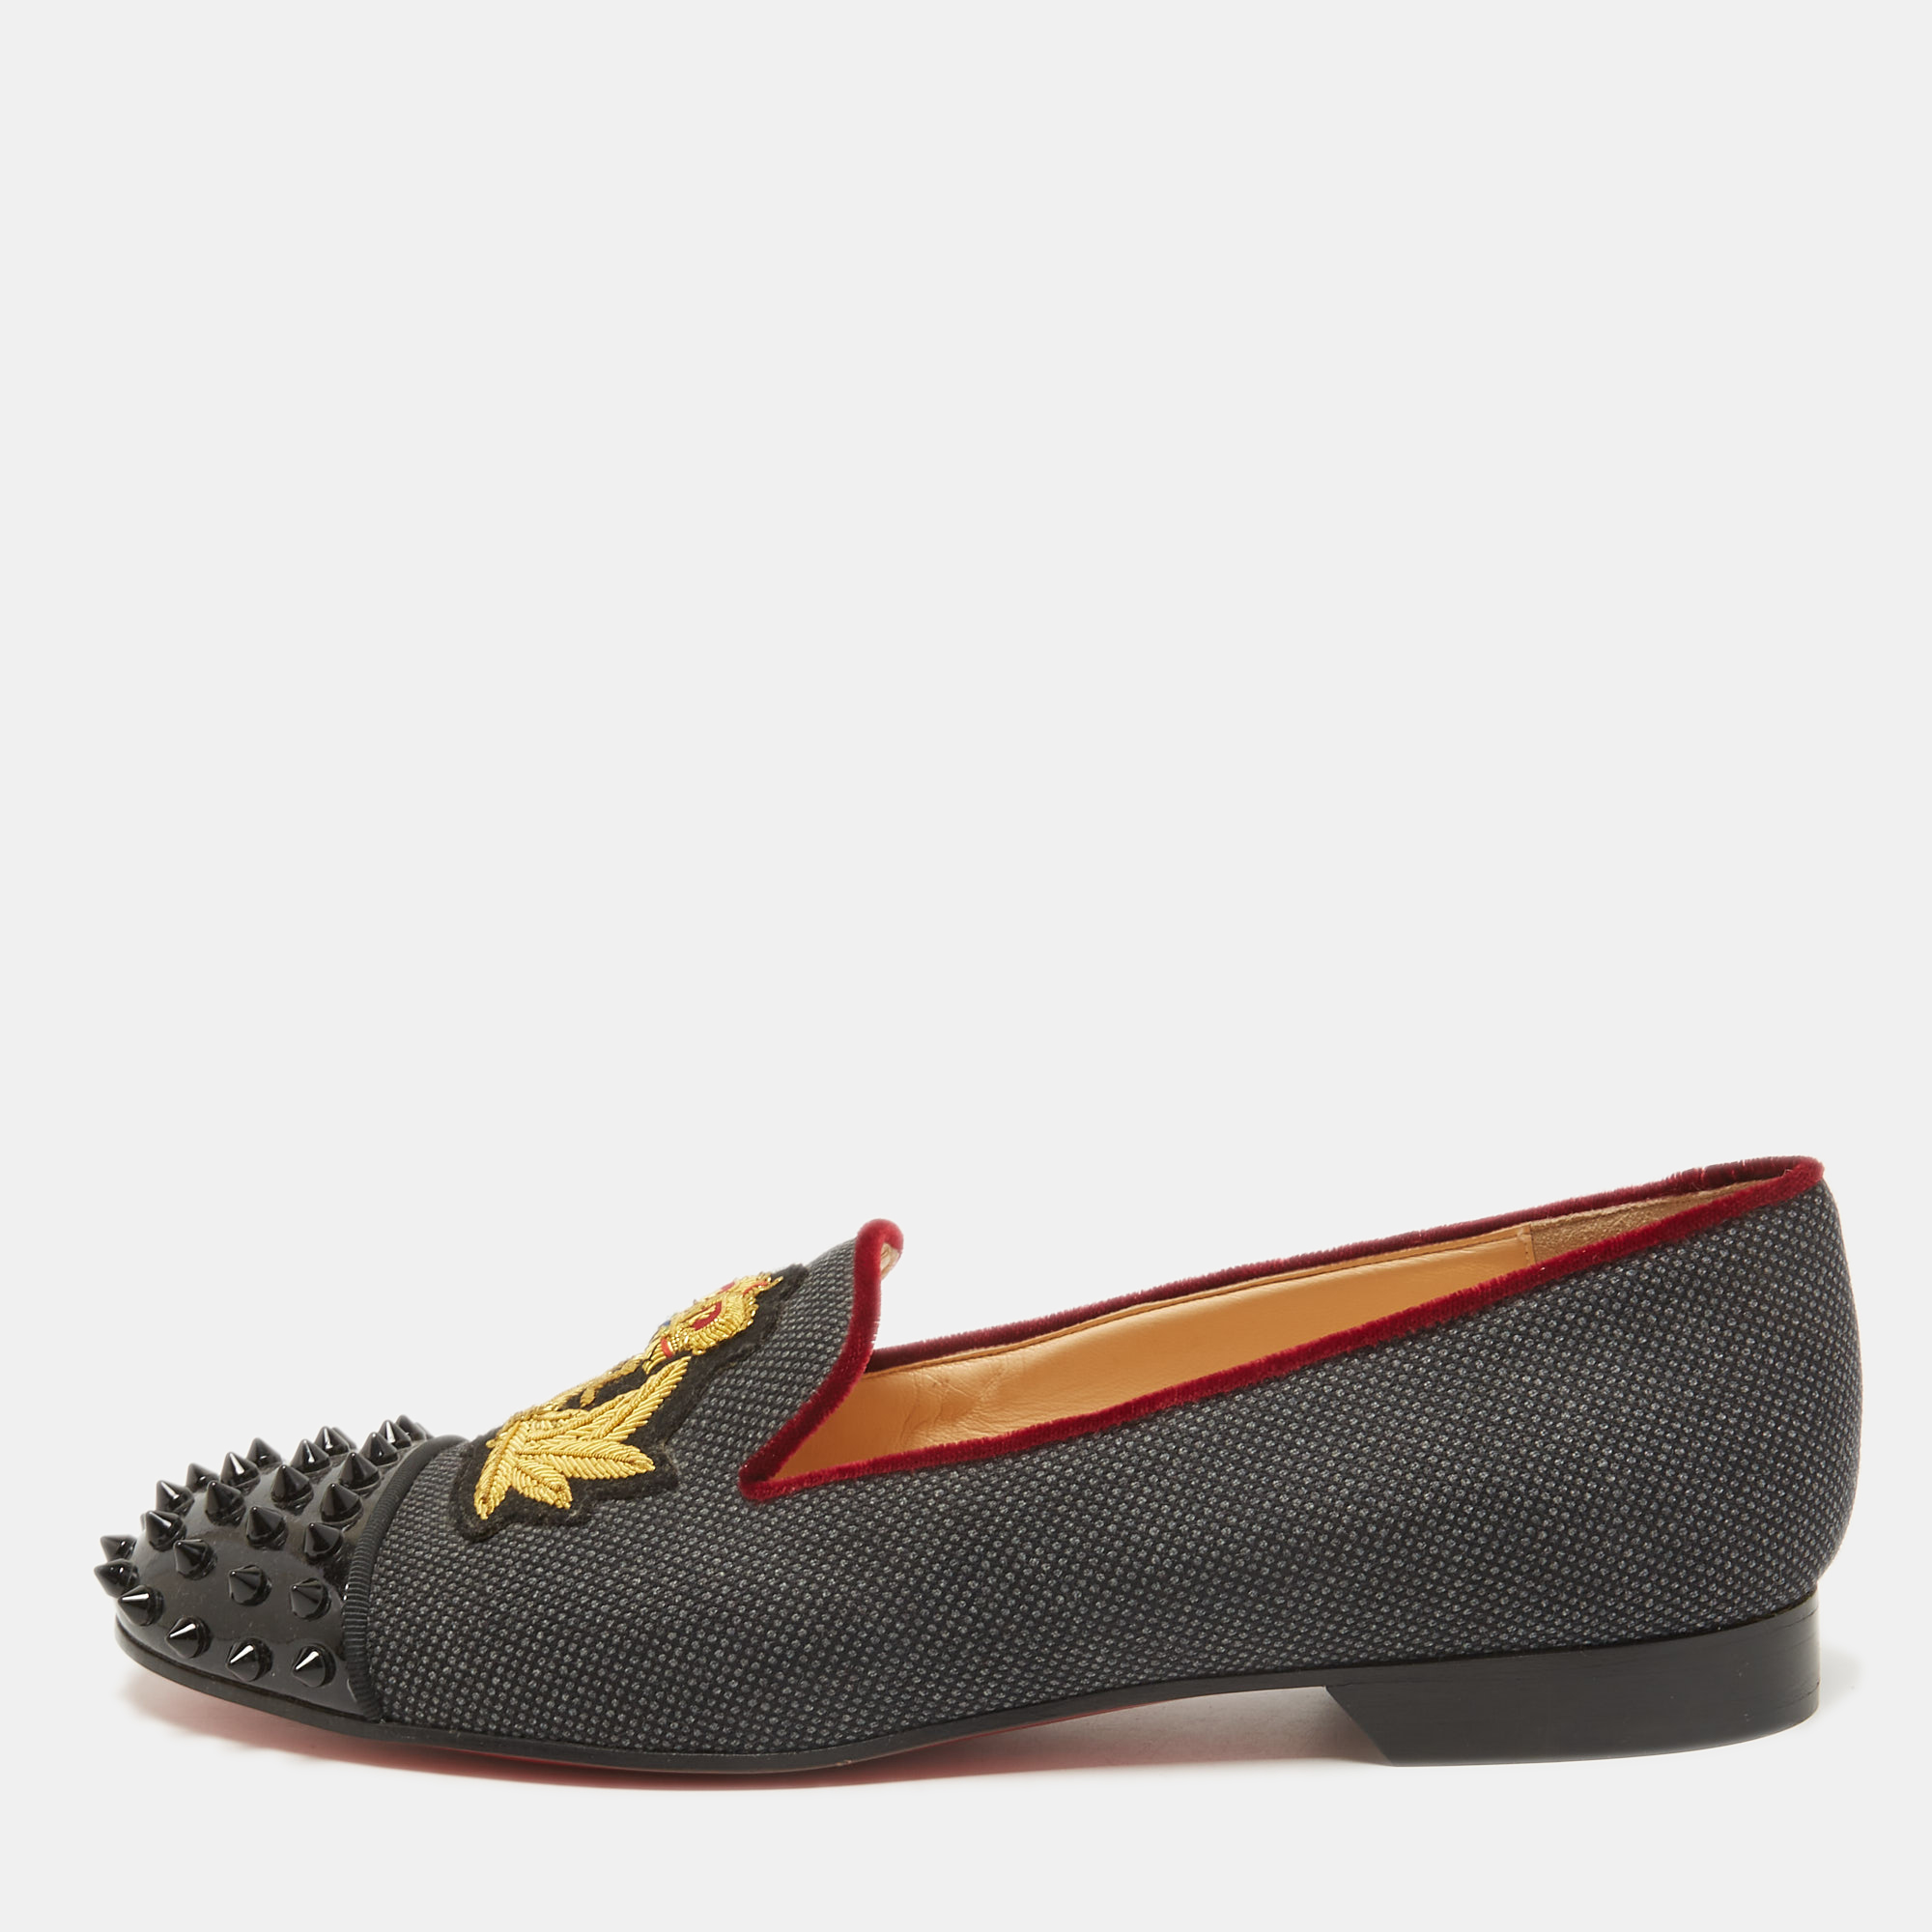 Pre-owned Christian Louboutin Grey/black Spiked Patent Leather And Fabric Harvanana Smoking Slippers Size 41